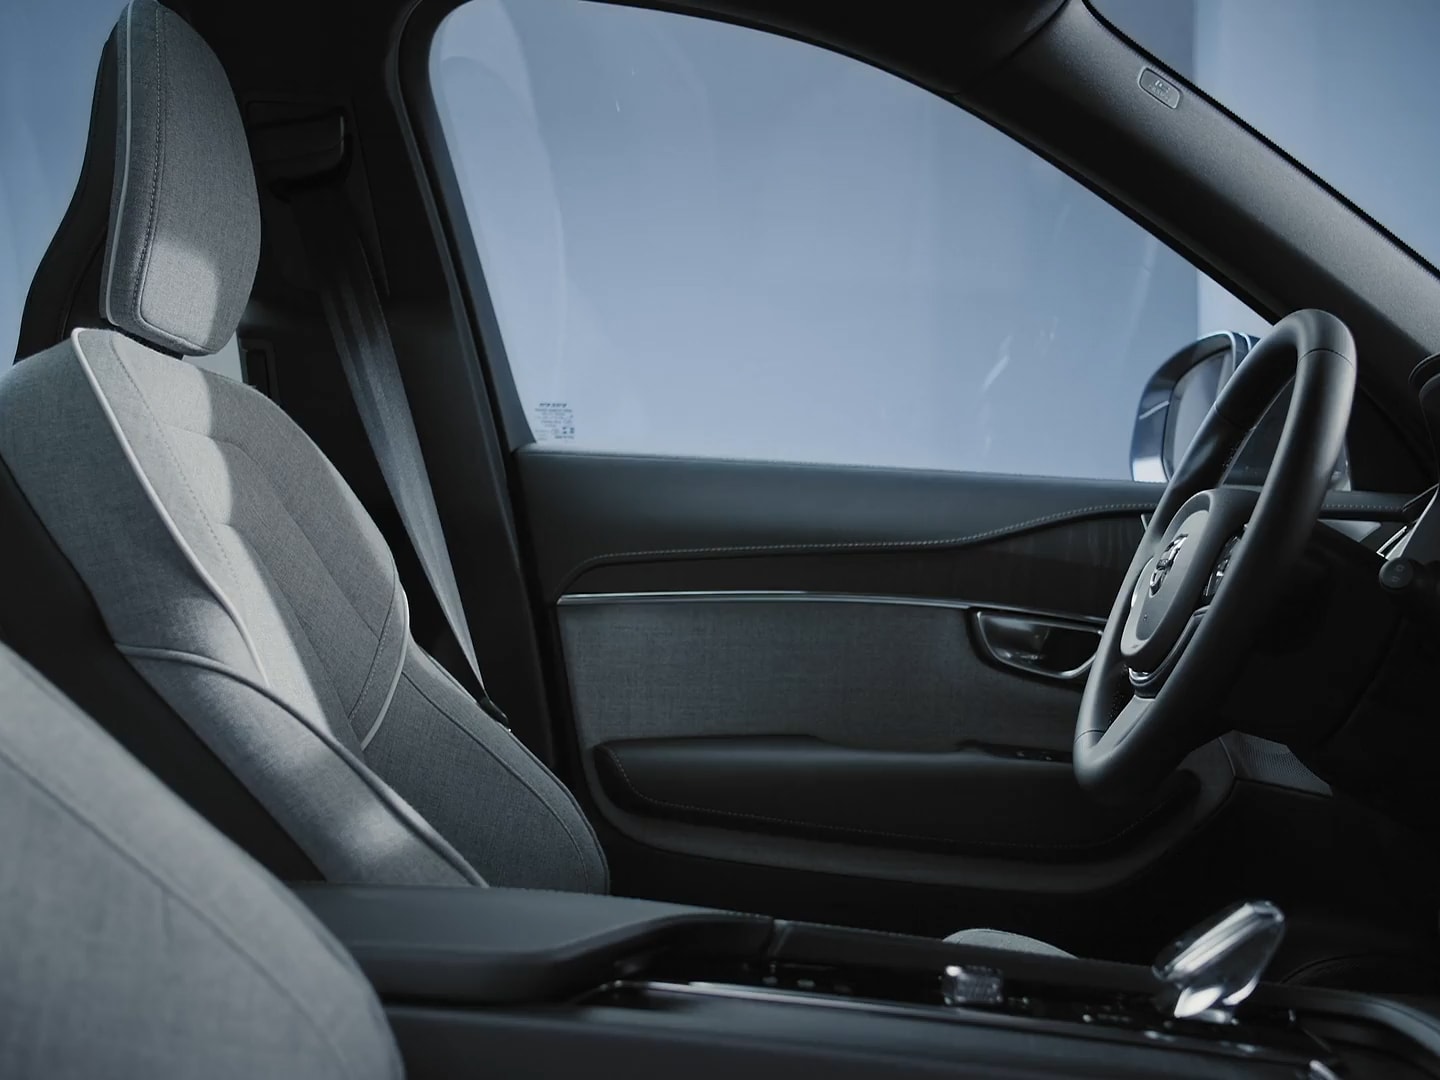 Passenger view of the Volvo XC90 plug-in hybrid driver’s seat and door in wool upholstery and black steering wheel.